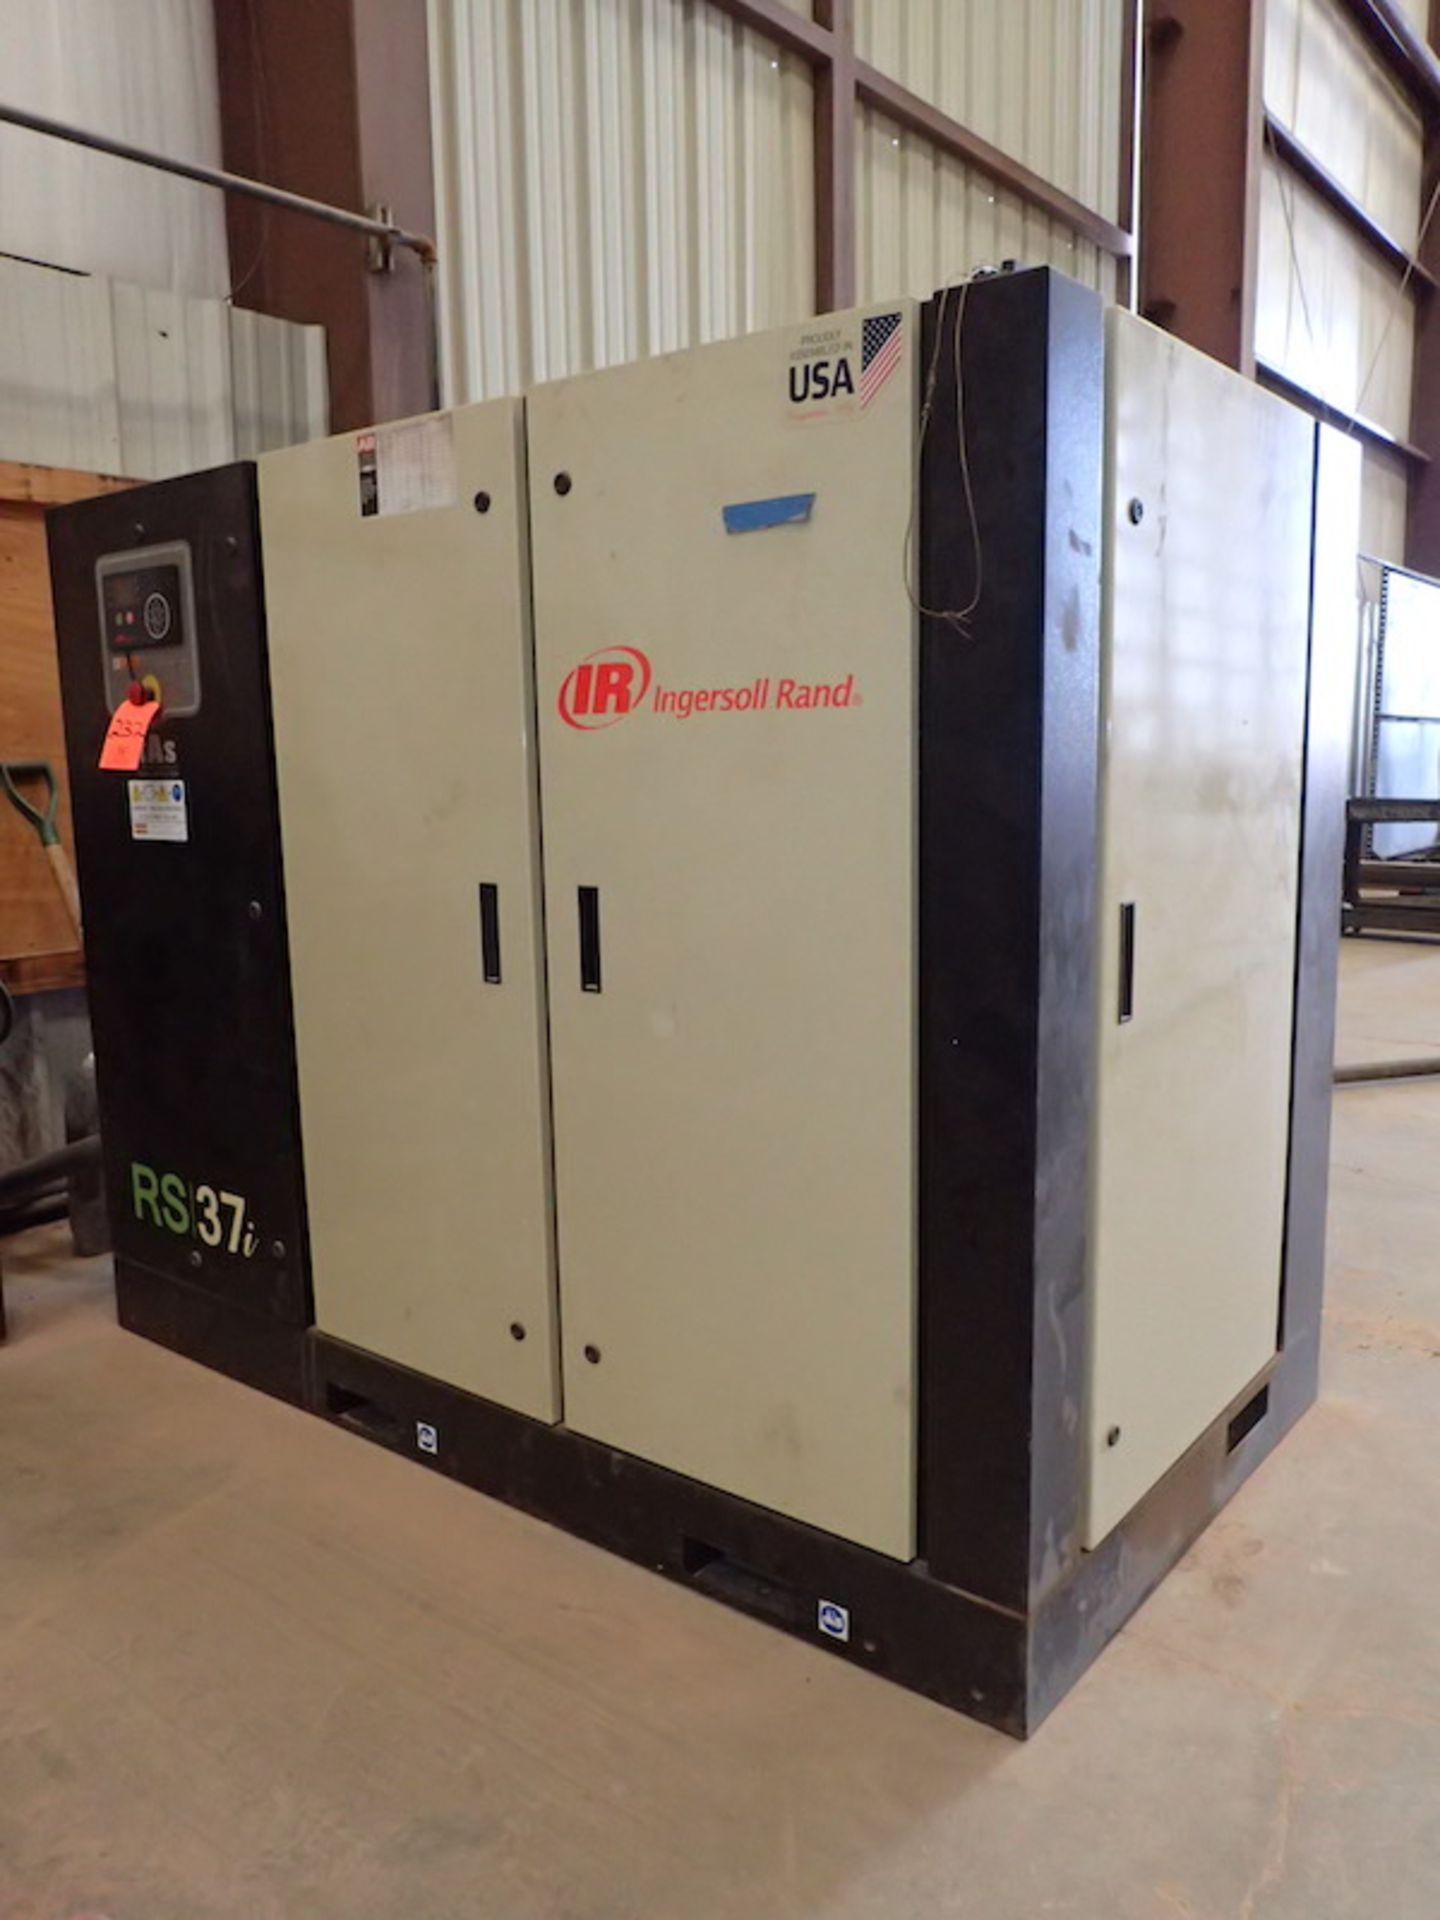 Ingersoll-Rand 50 HP Model RS37i-A118-TAS Rotary Screw Air Compressor, S/N: CBV701654; Rated at - Image 2 of 7